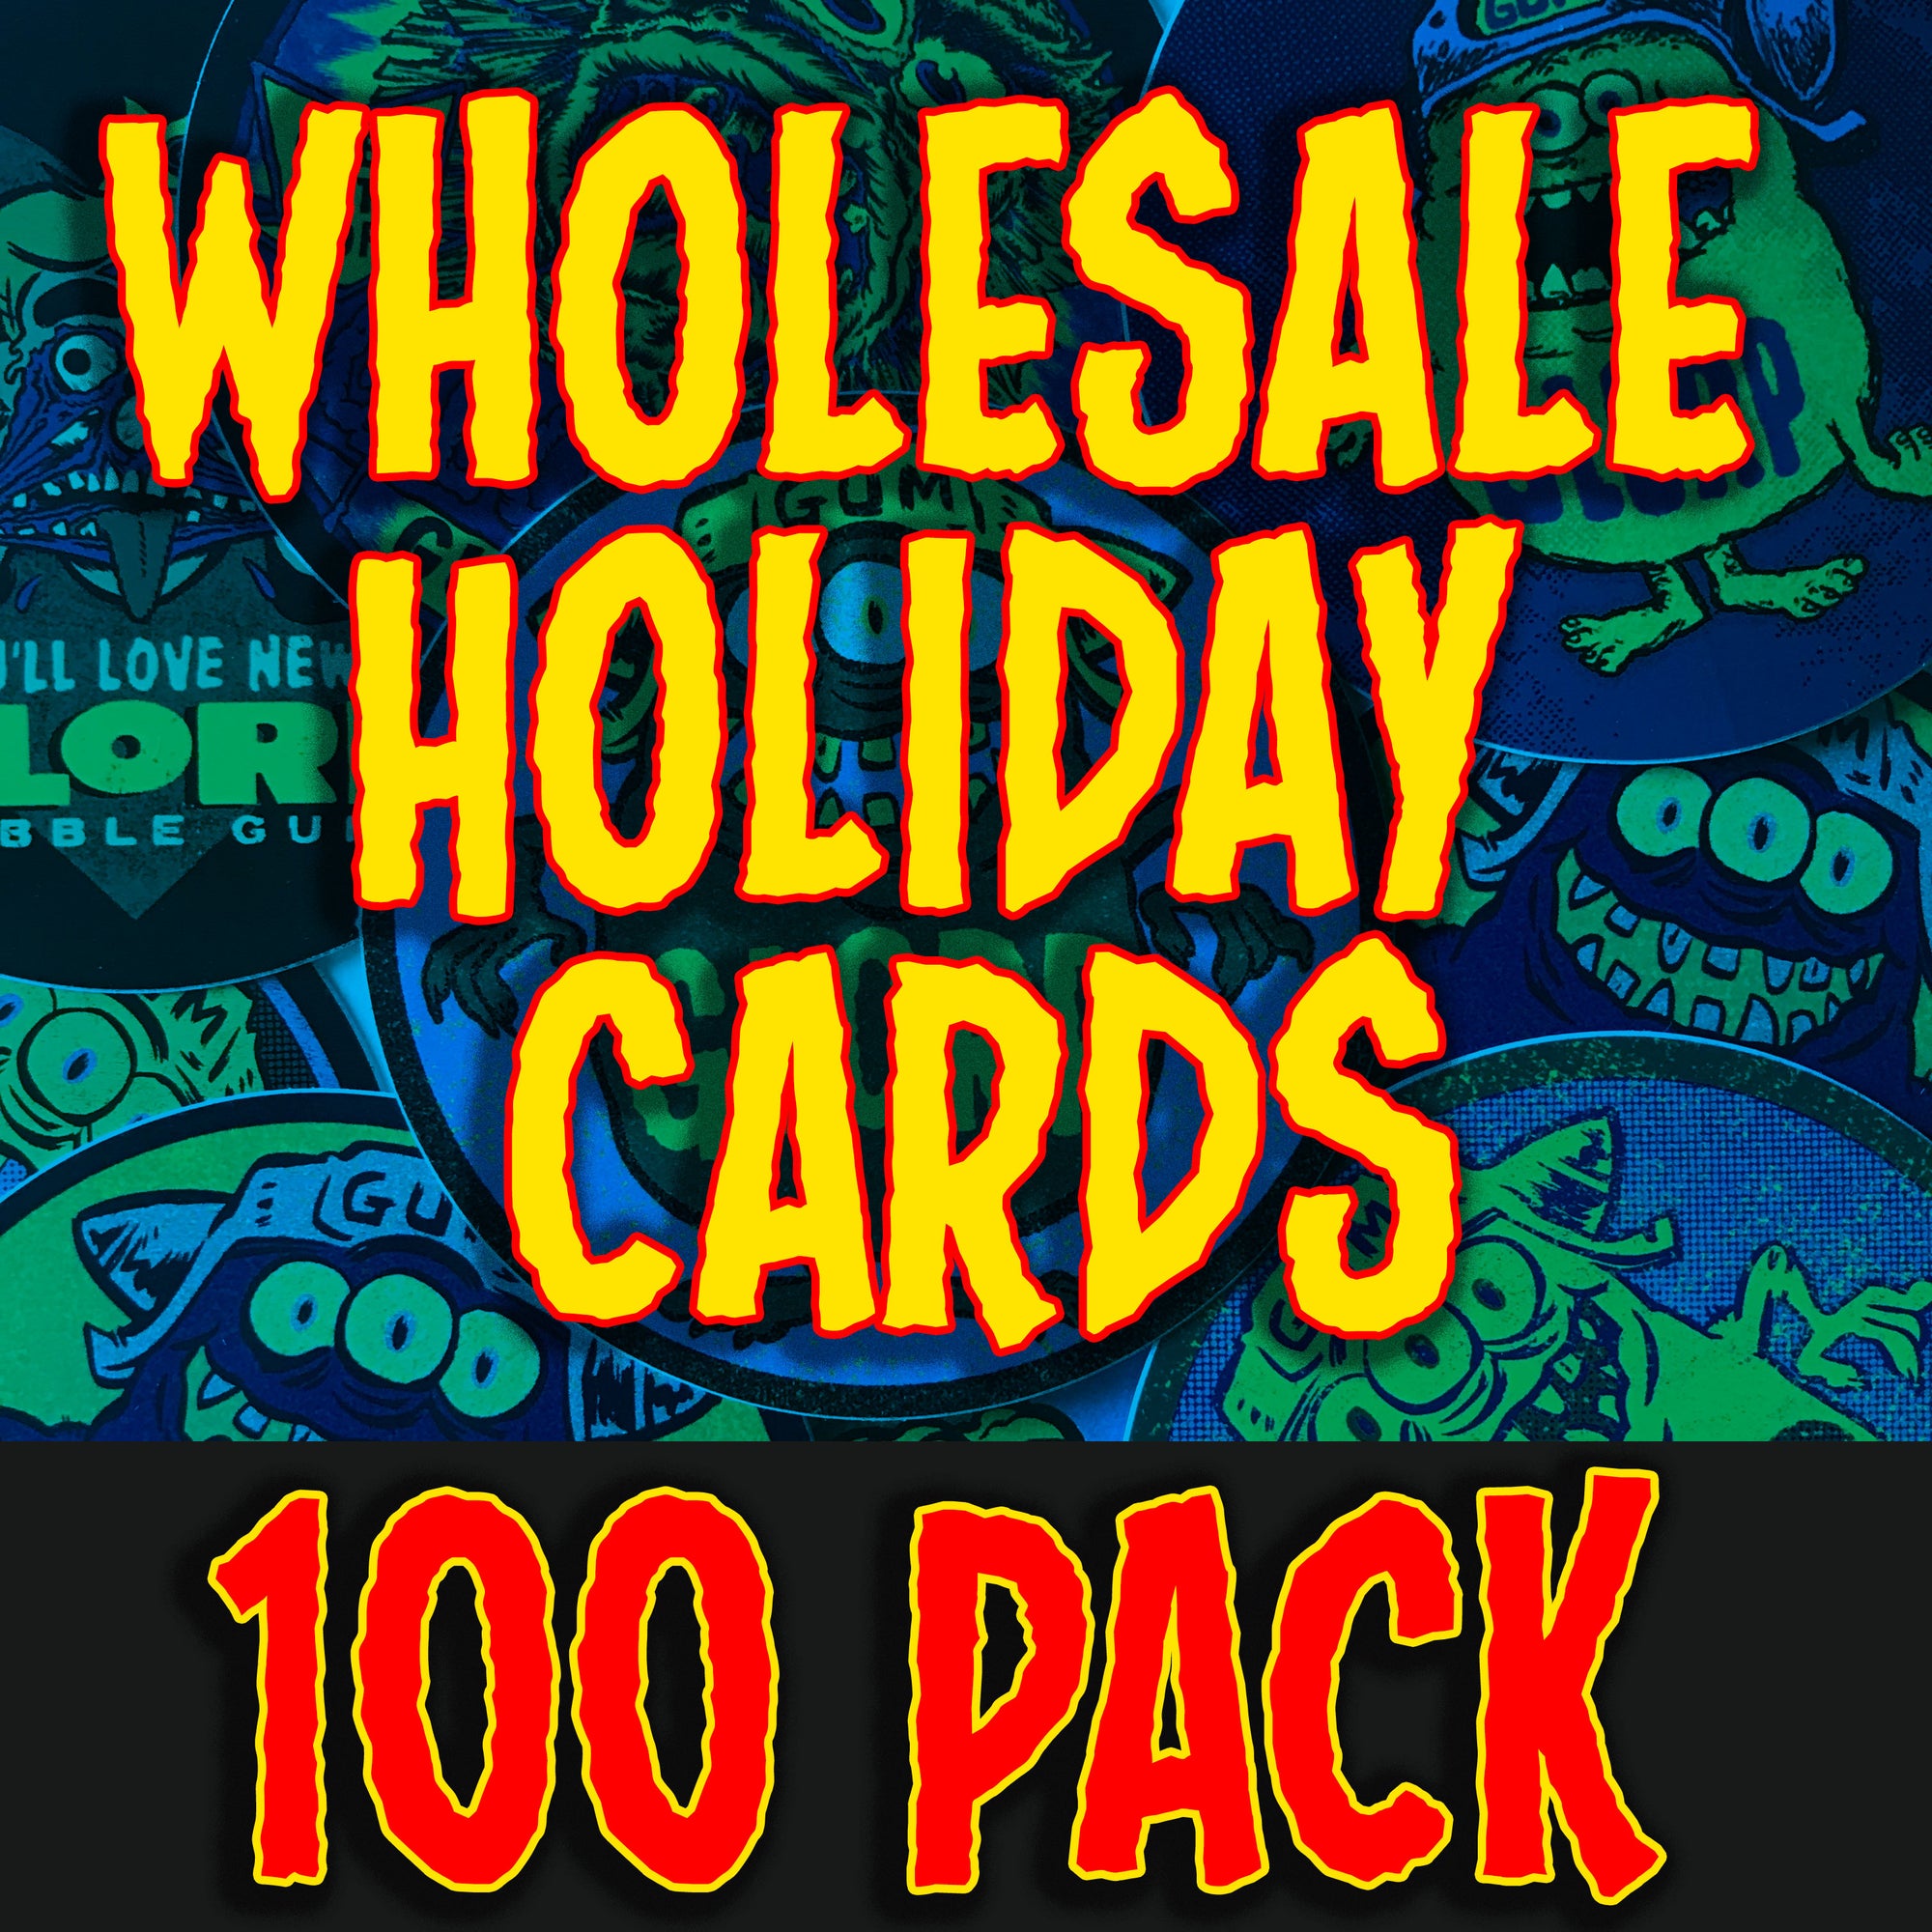 Wholesale Holiday card pack of 100